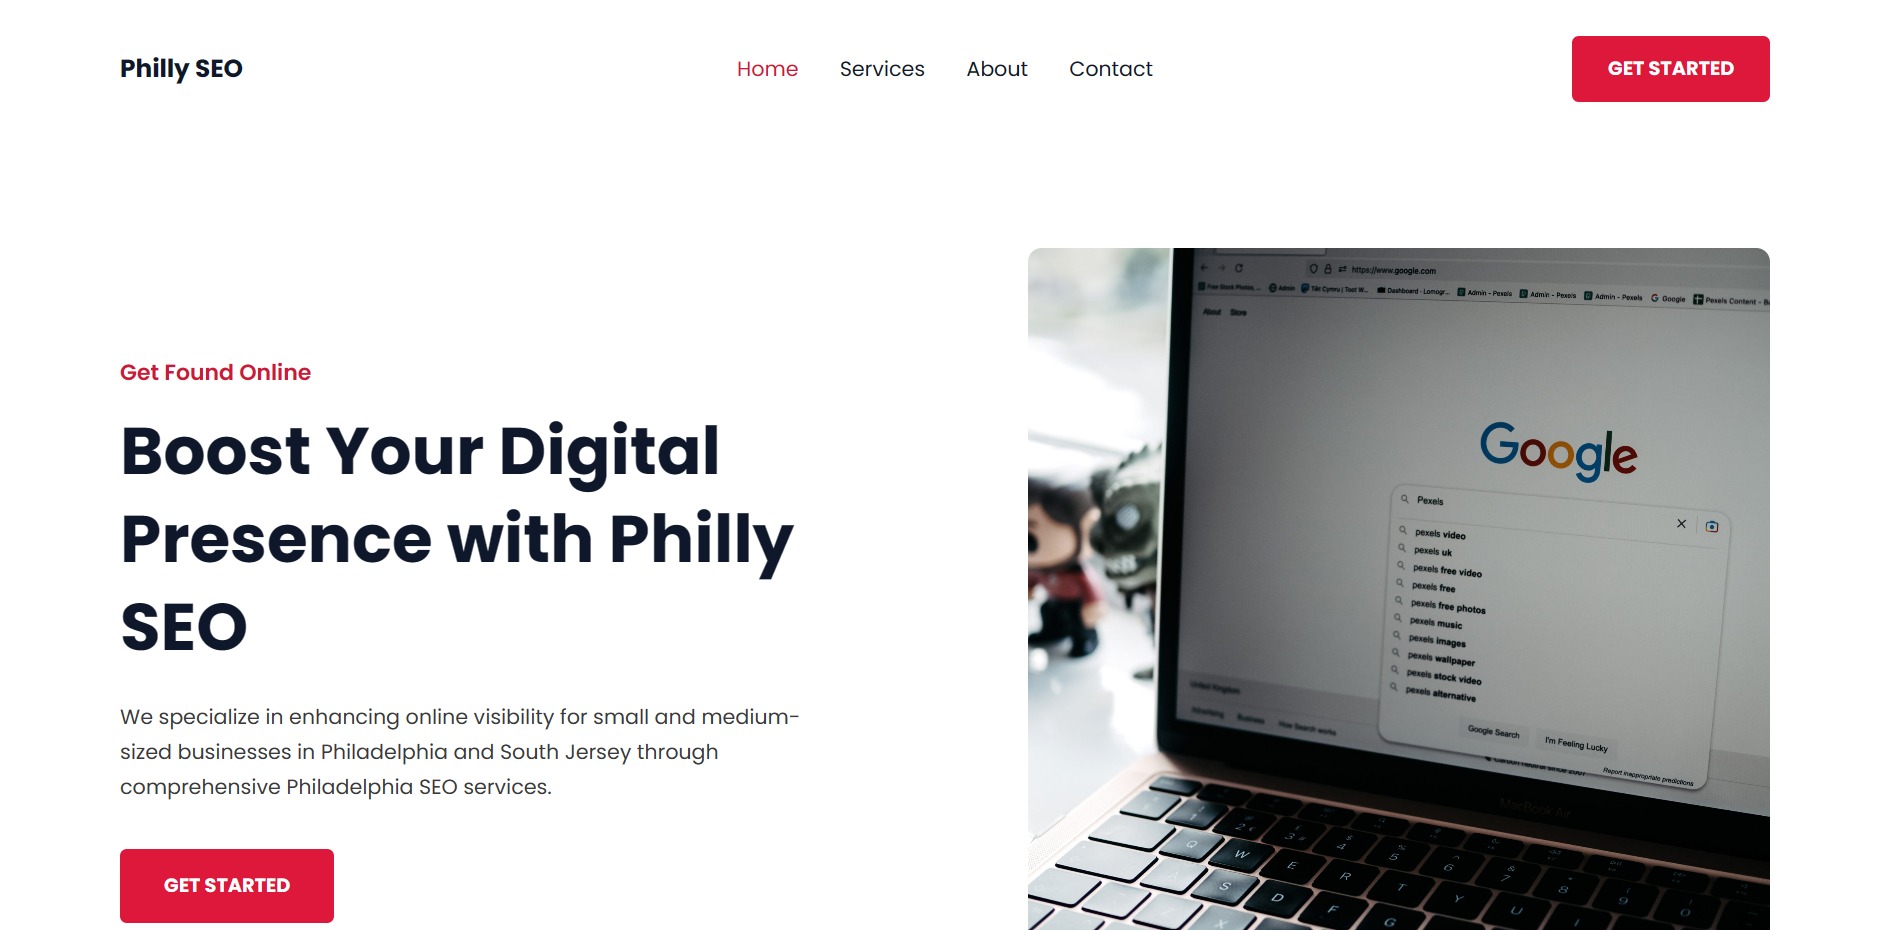 Philly SEO